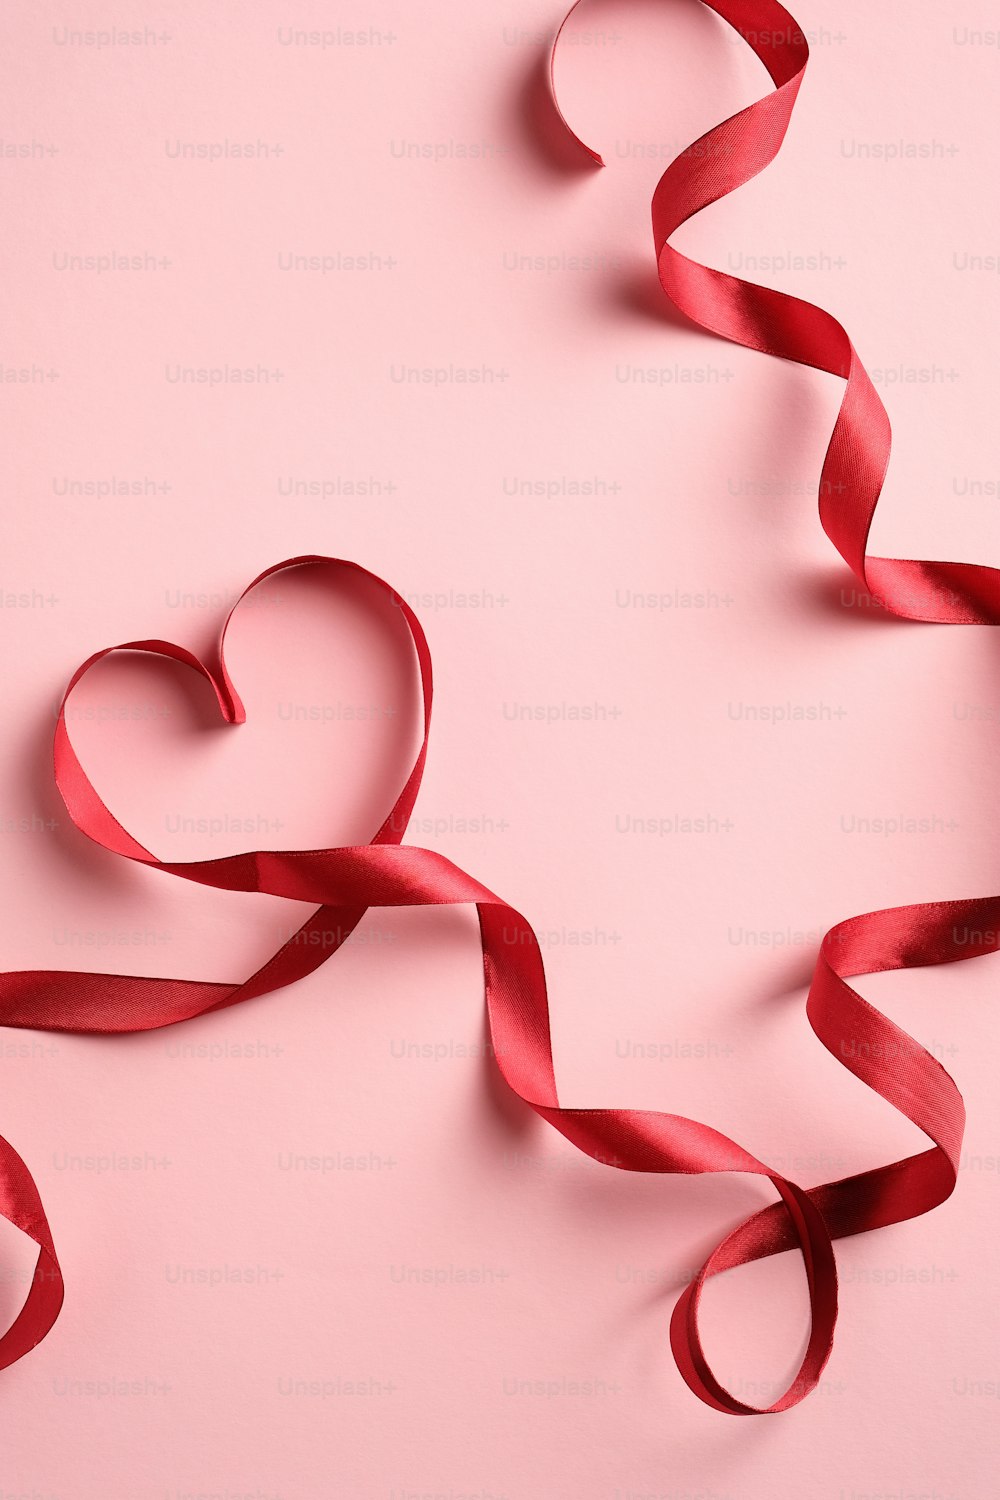 Heart shaped red ribbon on pink background. Love, romance concept. Valentines Day or Mothers day greeting card template.